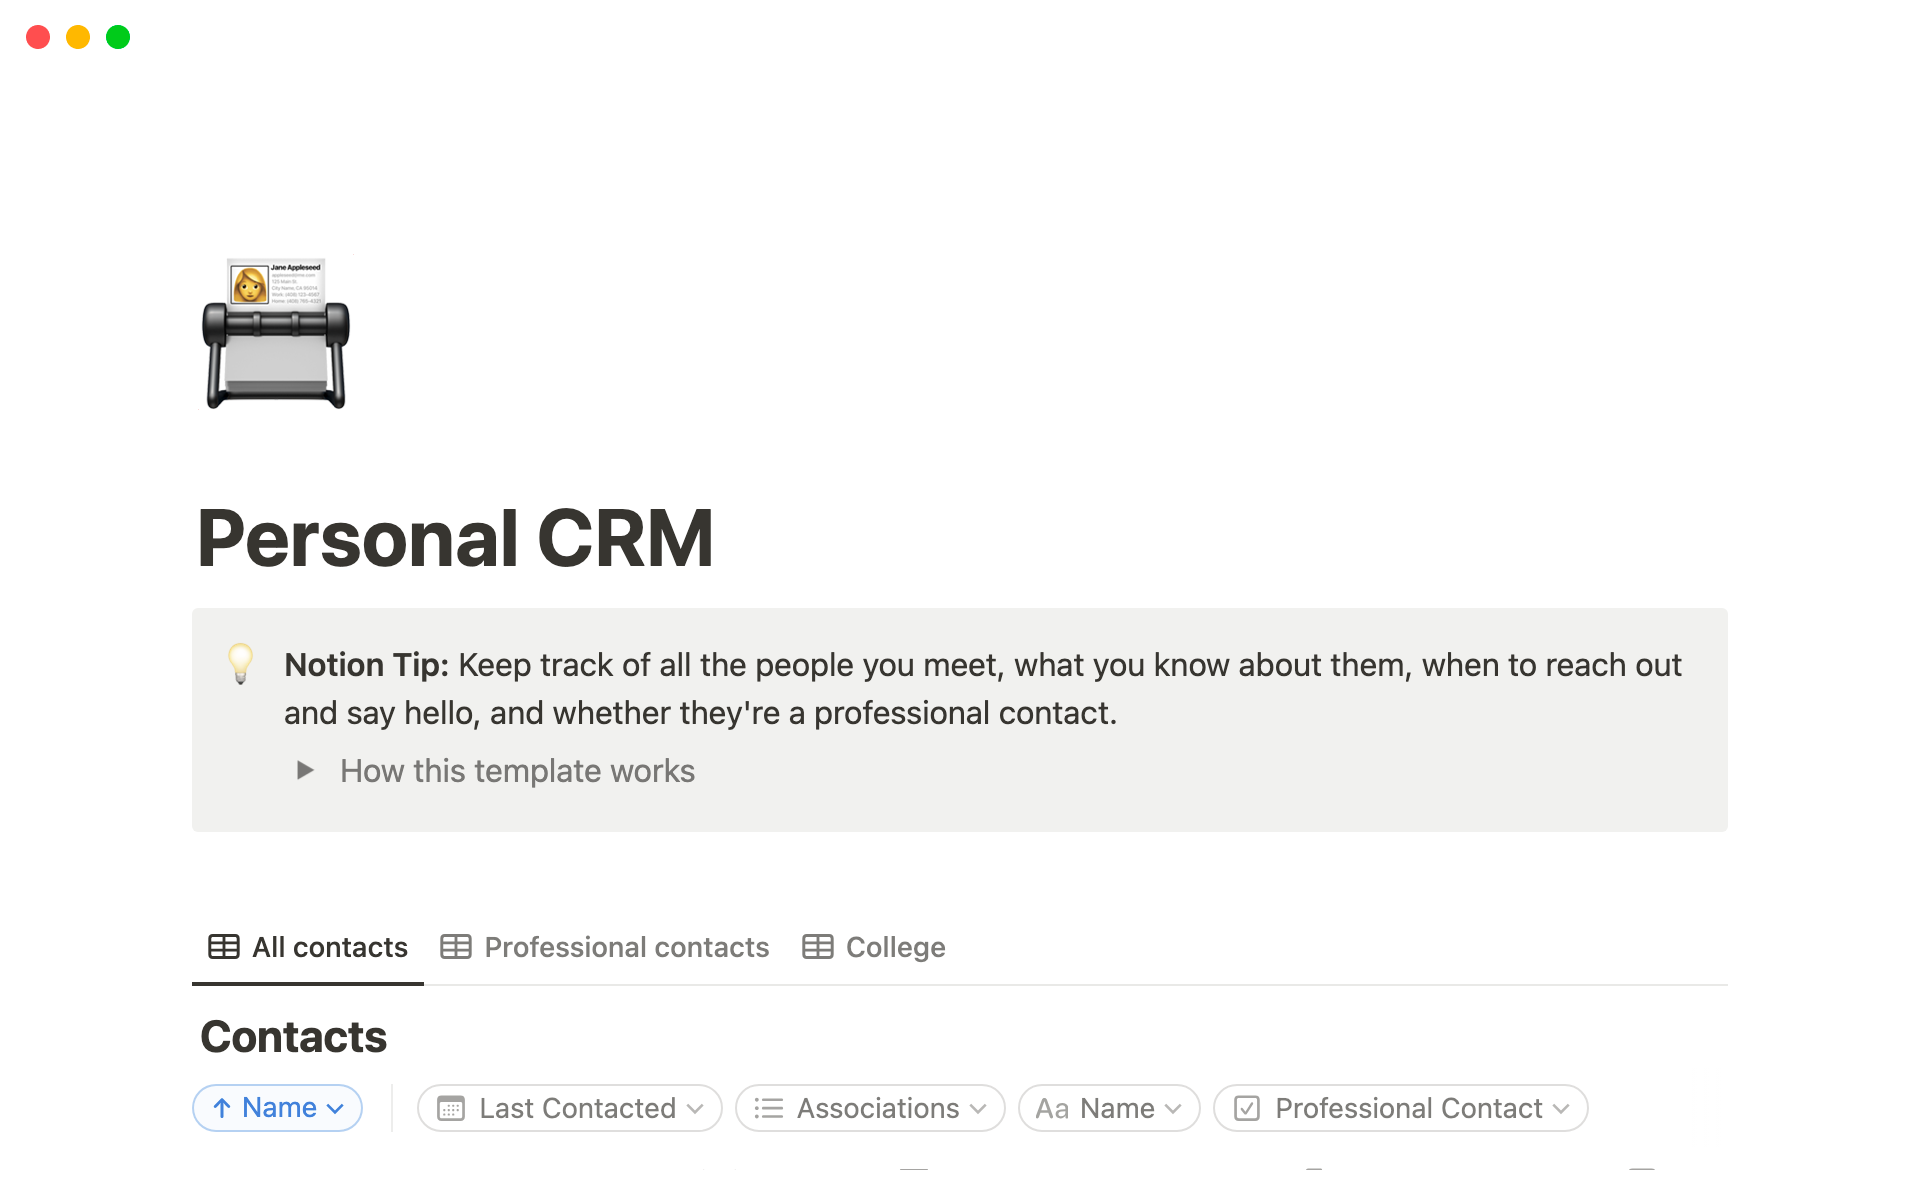 The desktop image for the Personal CRM template